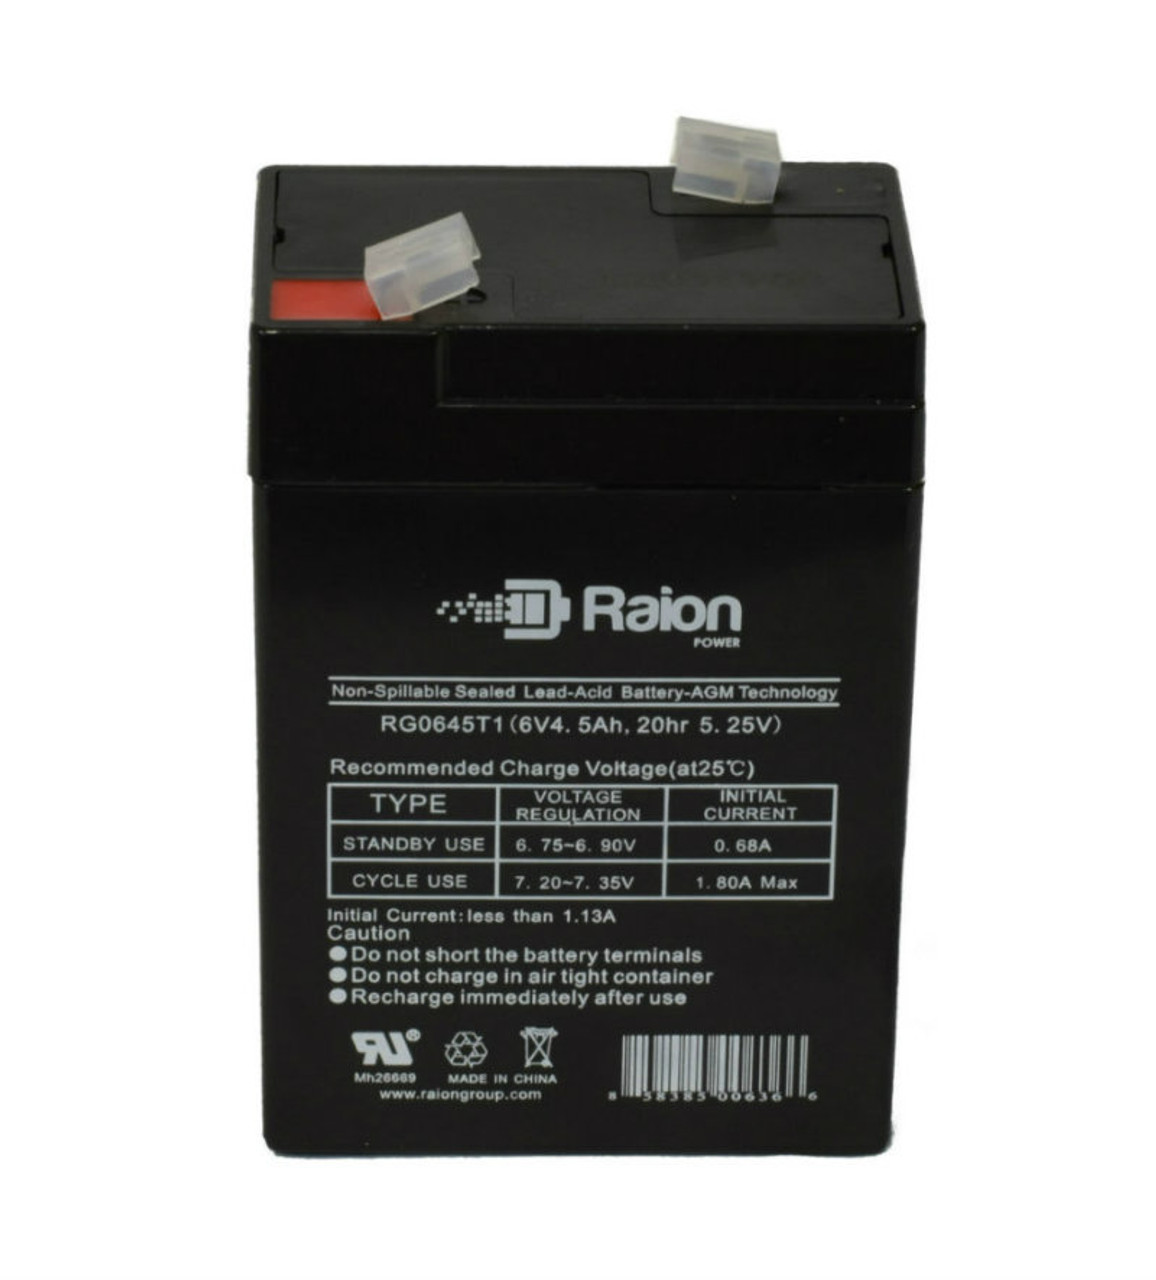 Raion Power RG0645T1 Replacement Battery Cartridge for Vision CP645LA